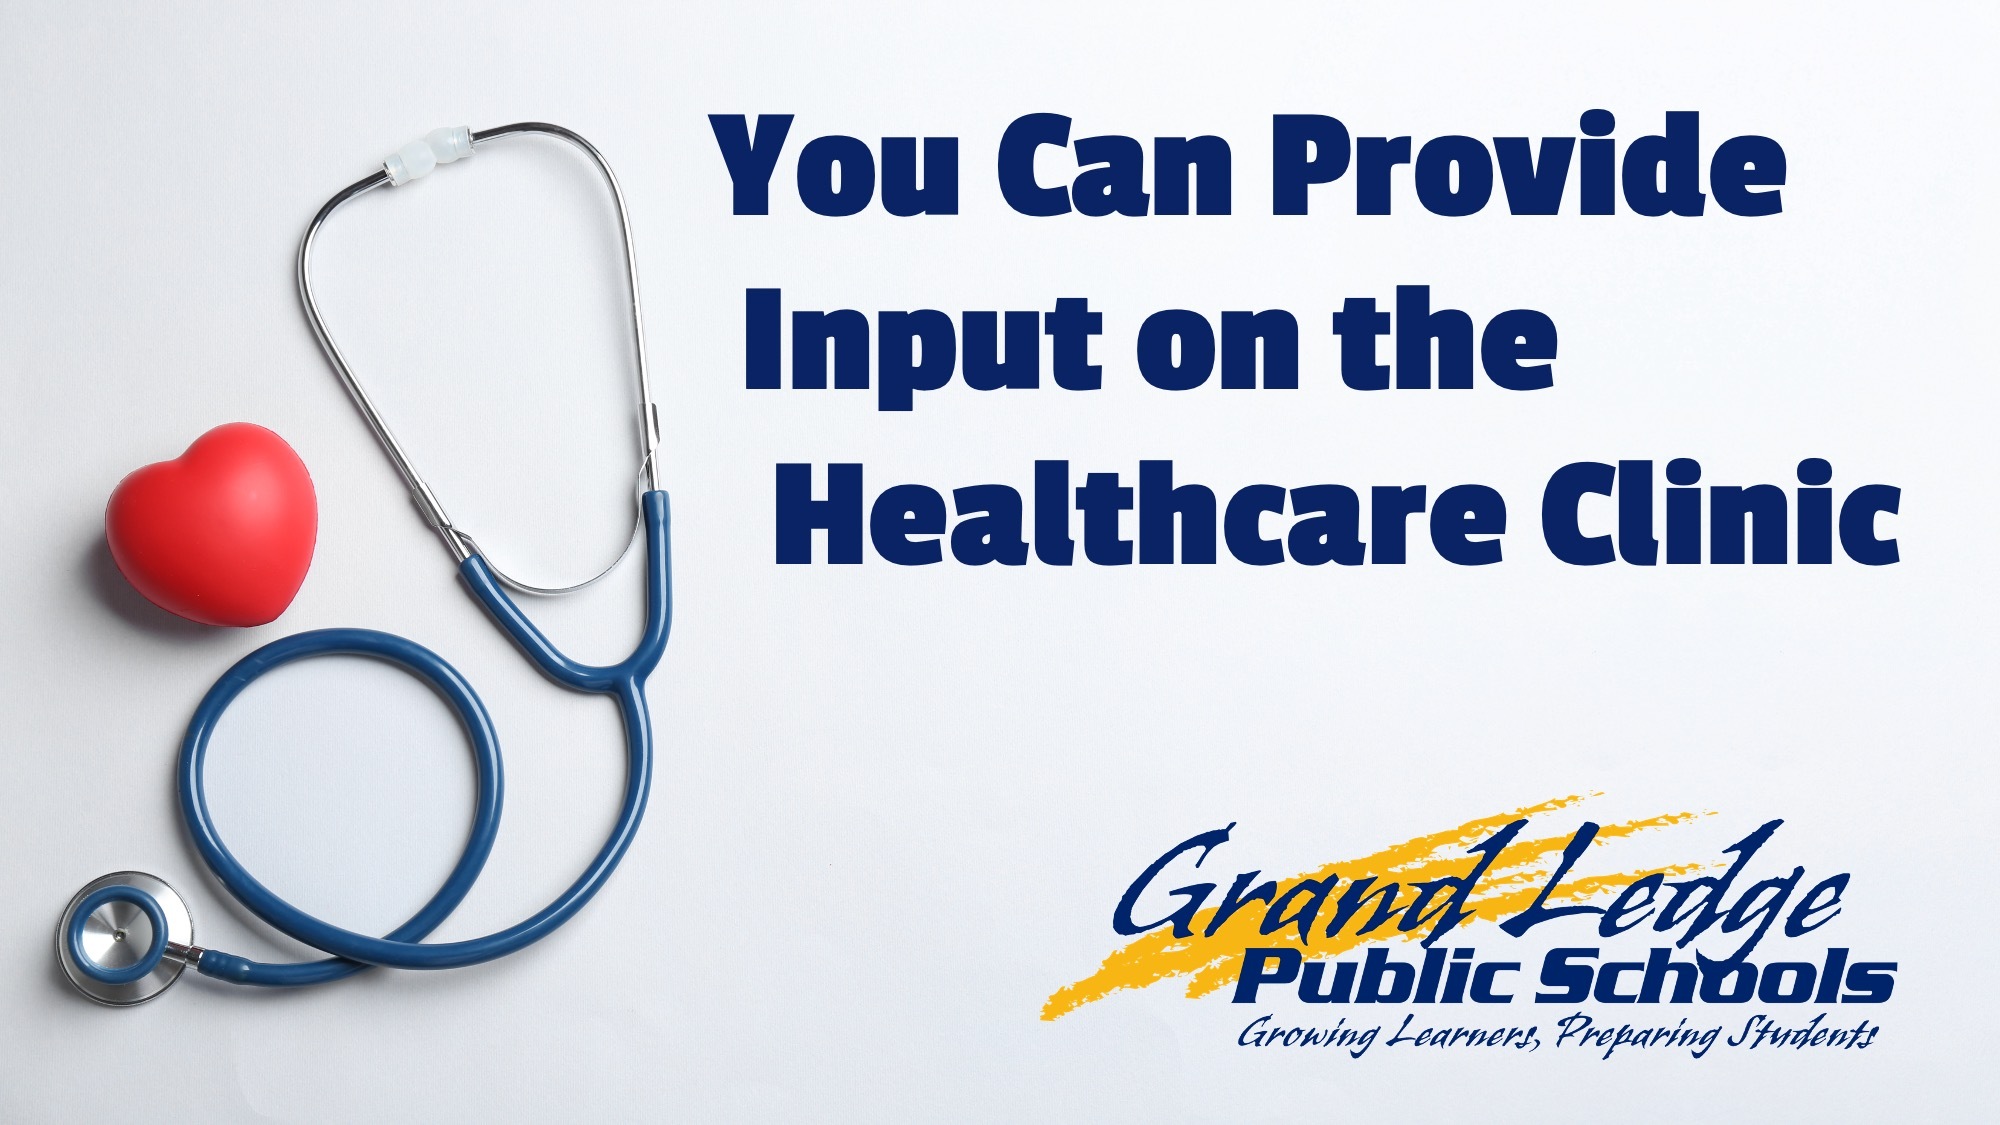 You Can Provide Input on the Healthcare Clinic